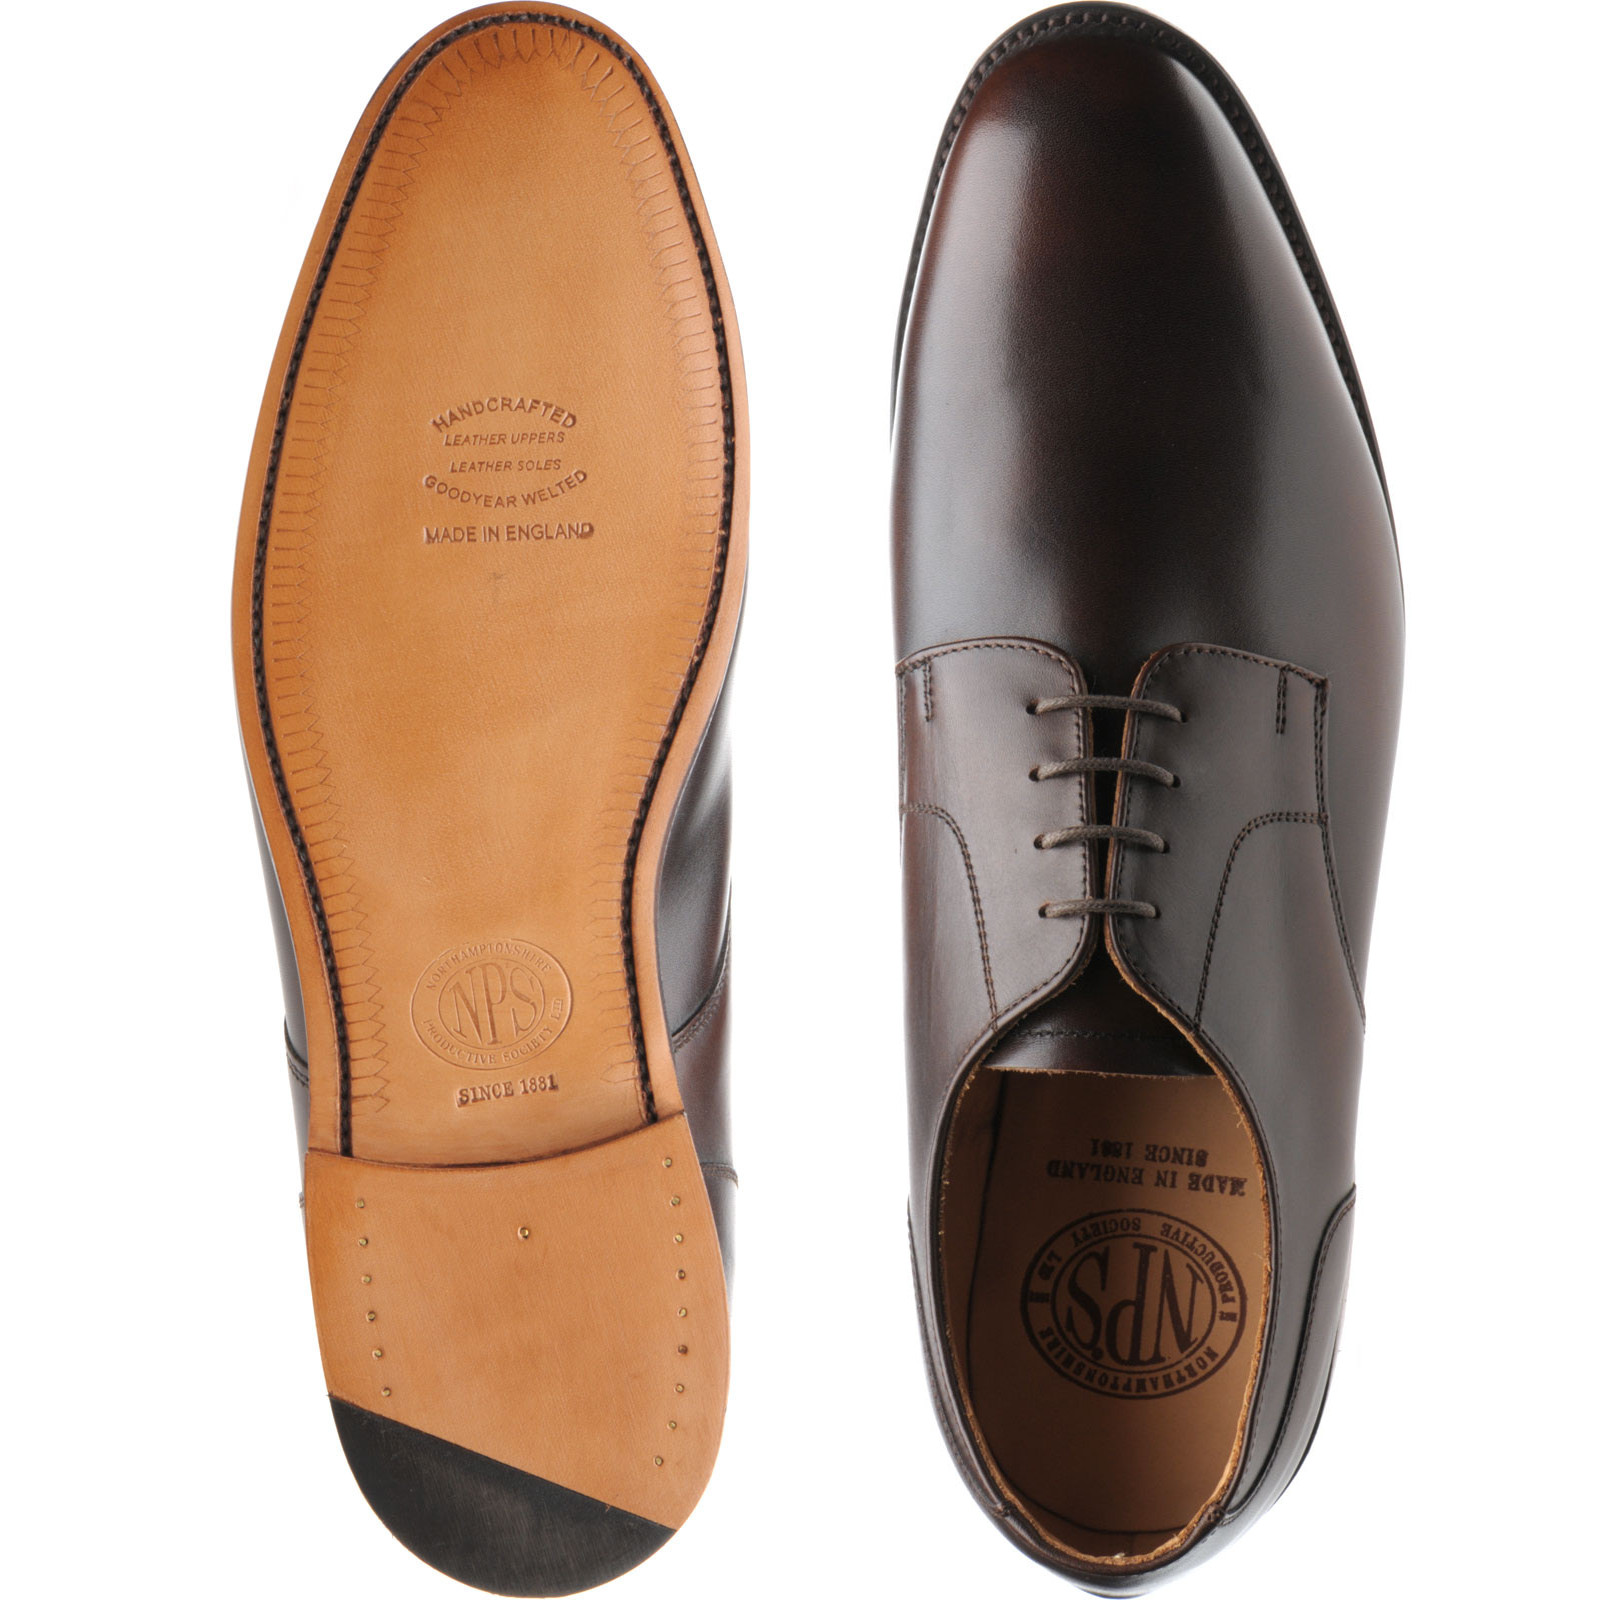 NPS shoes | NPS Sale | Cameron in Walnut at Herring Shoes